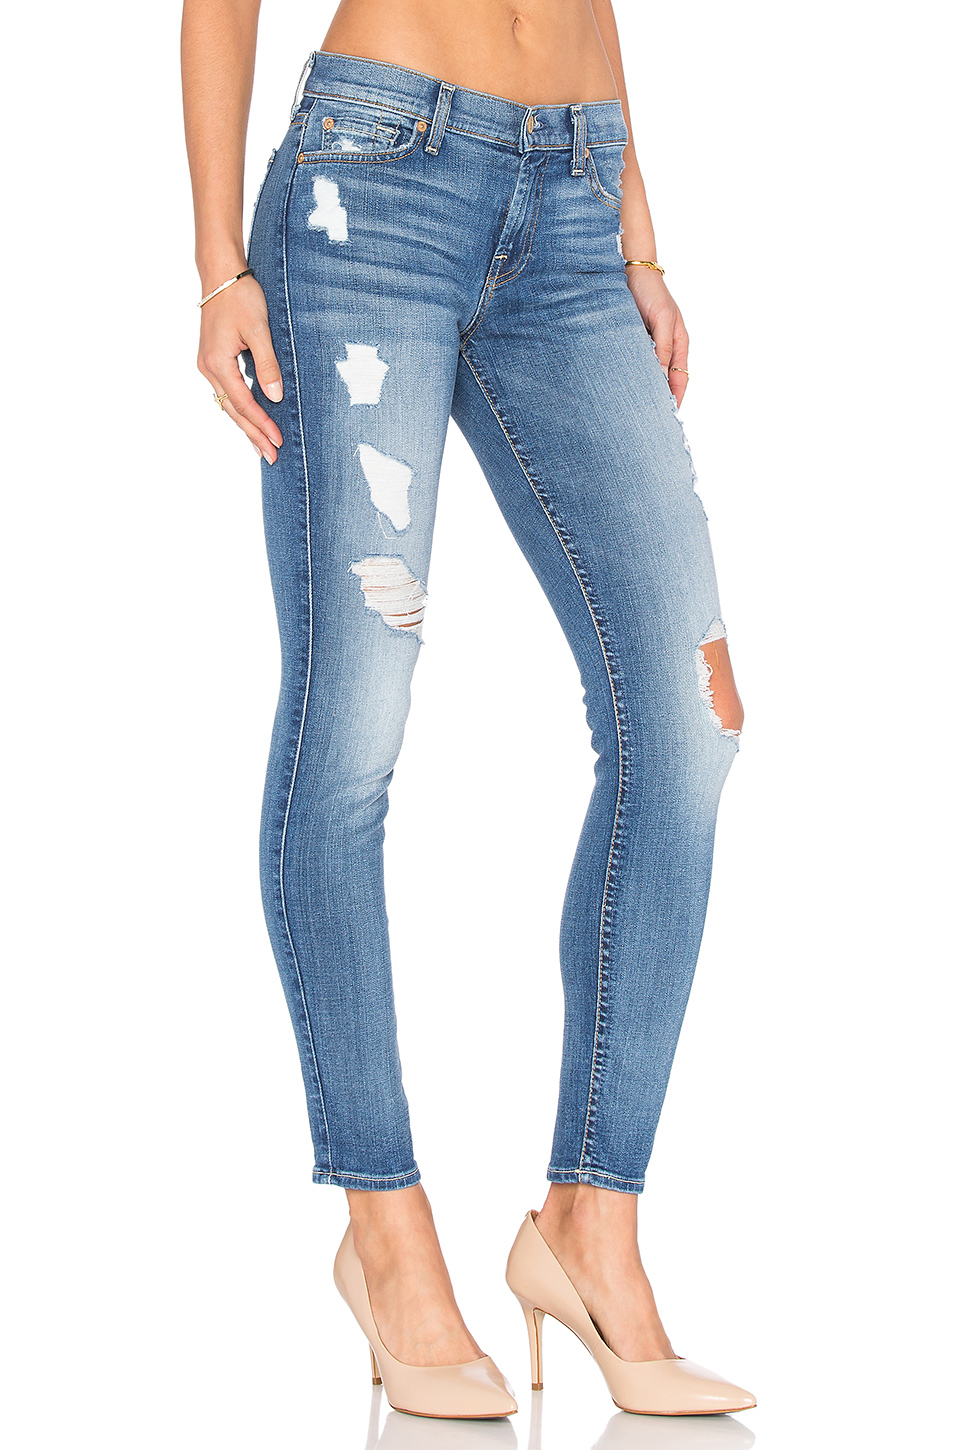 Lyst - 7 For All Mankind The Squiggle Destroy Skinny in Blue